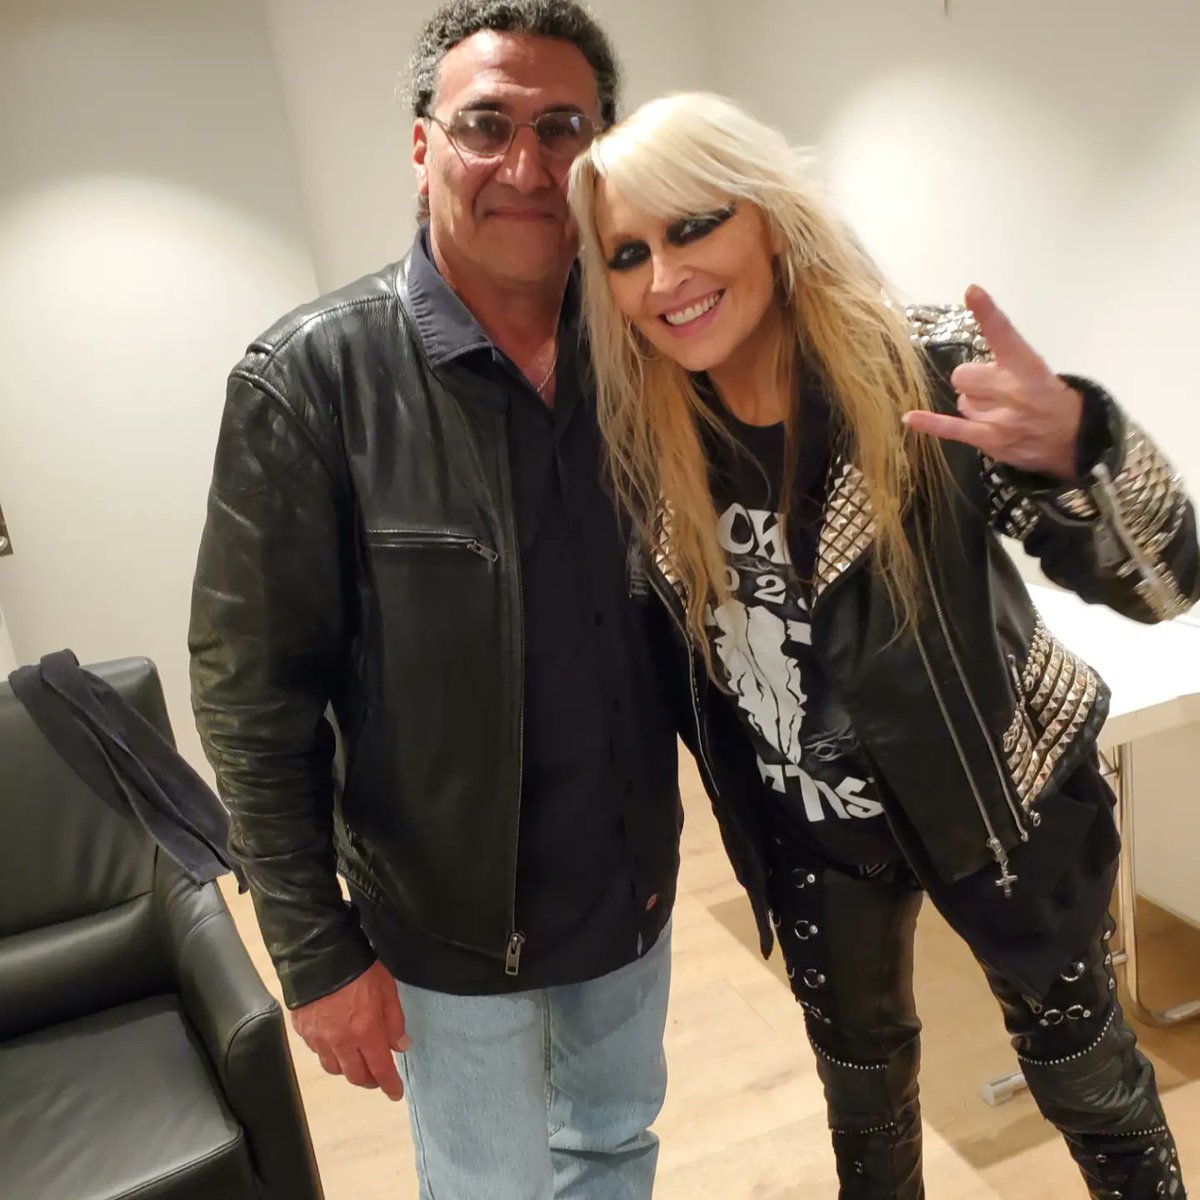 Amazing show in Dusseldorf, Germany Saturday with @DoroOfficial & @GRAVEDIGGERclan for Doro's 40th Anniversary at Mitsubishi Halle. Guest appearances by @tarjaofficial @AWhiteGluz & Mille from @kreator full story in 2 weeks on @Metalcontraband